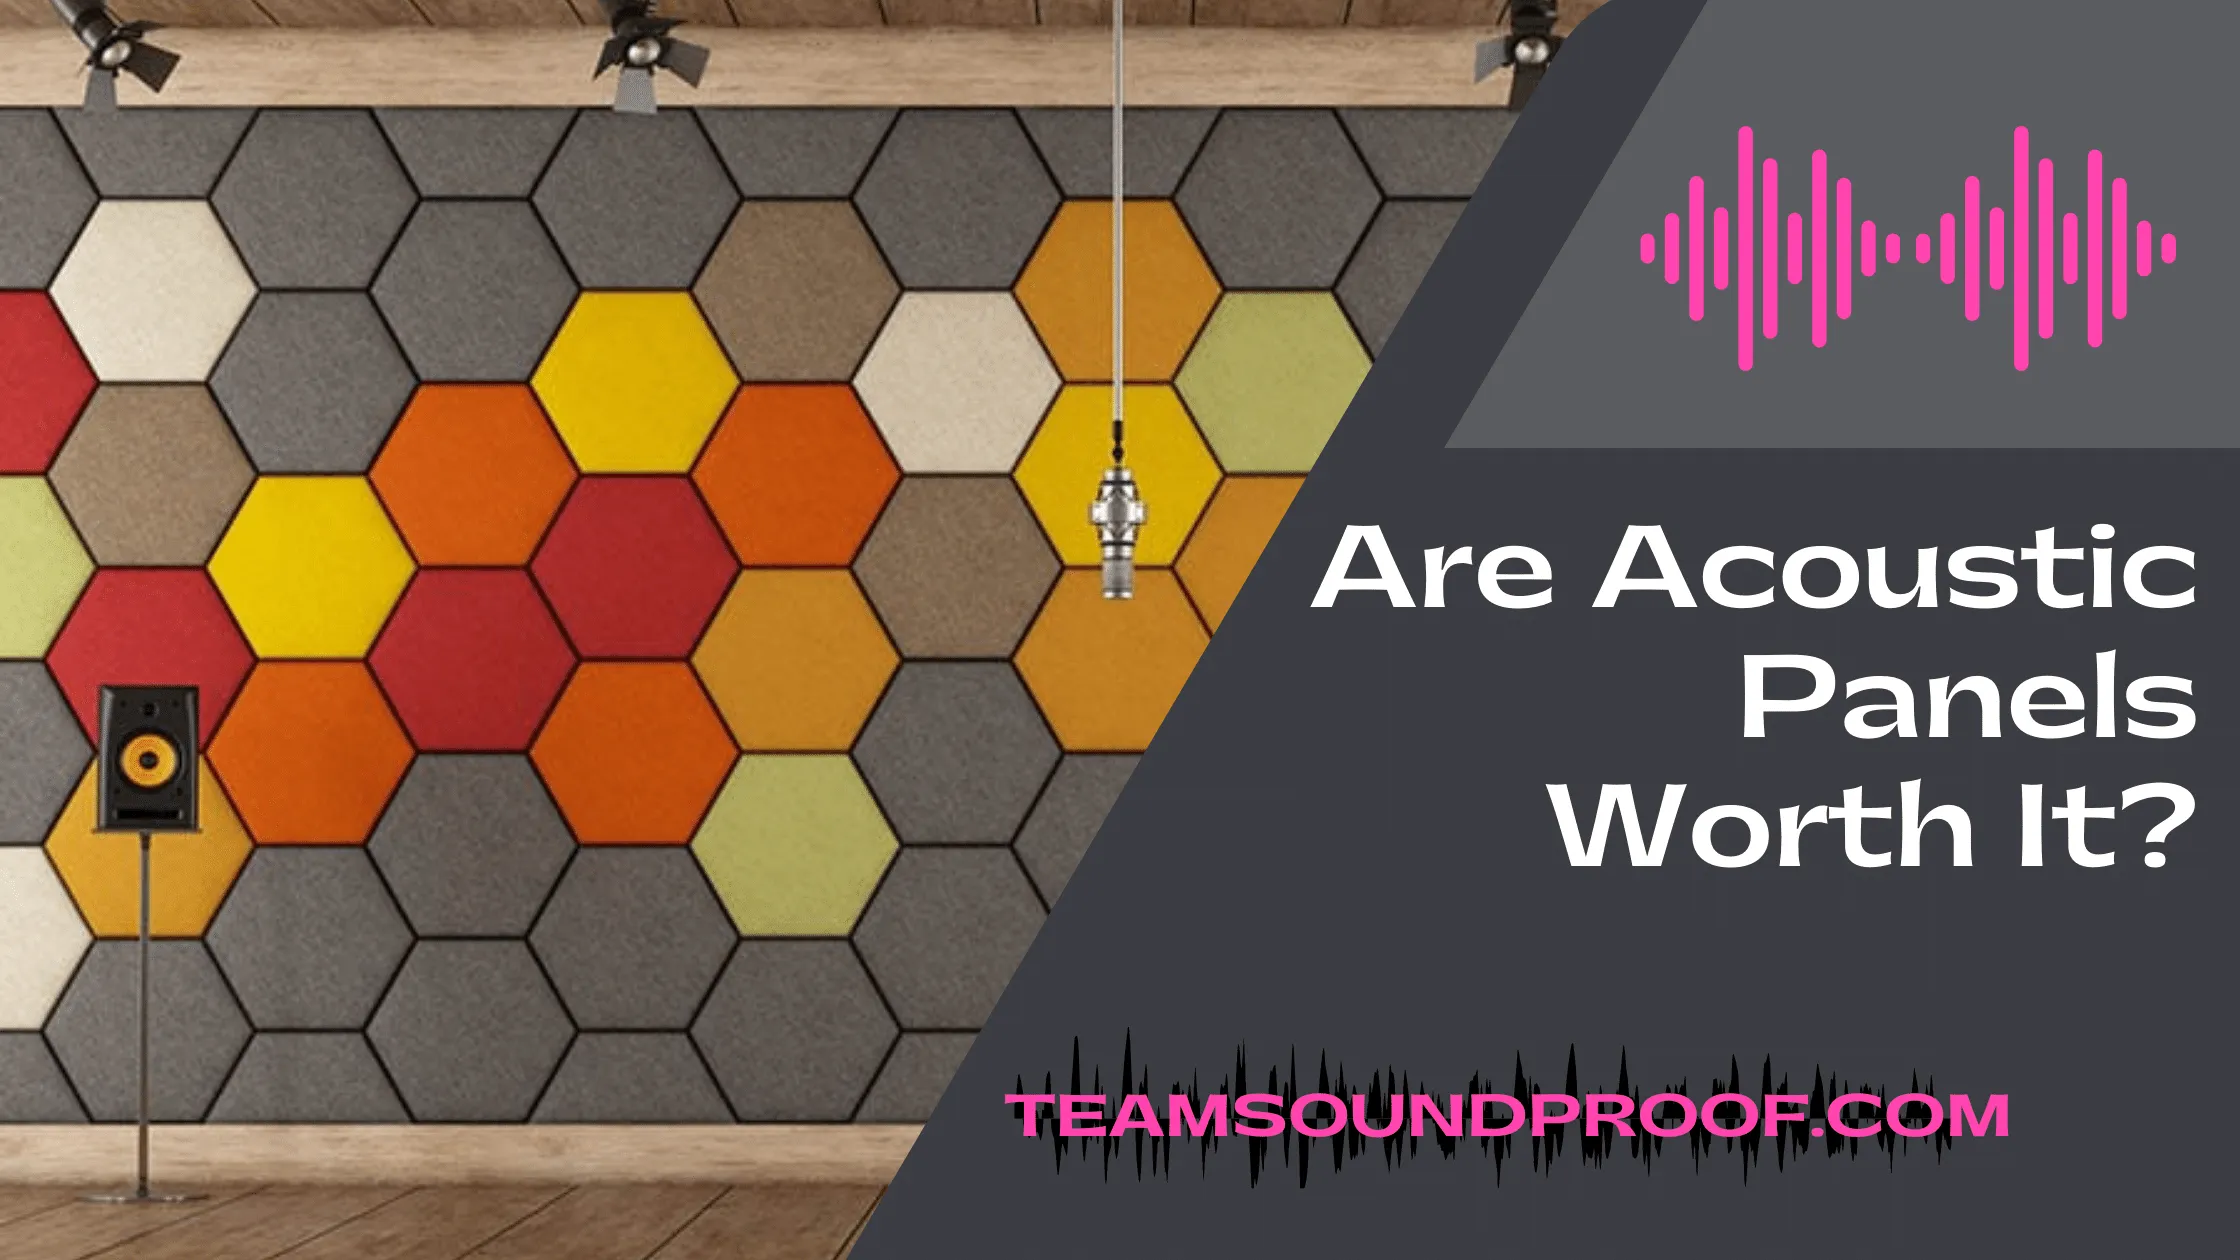 Are Acoustic Panels Worth It? - Comprehensive Guide